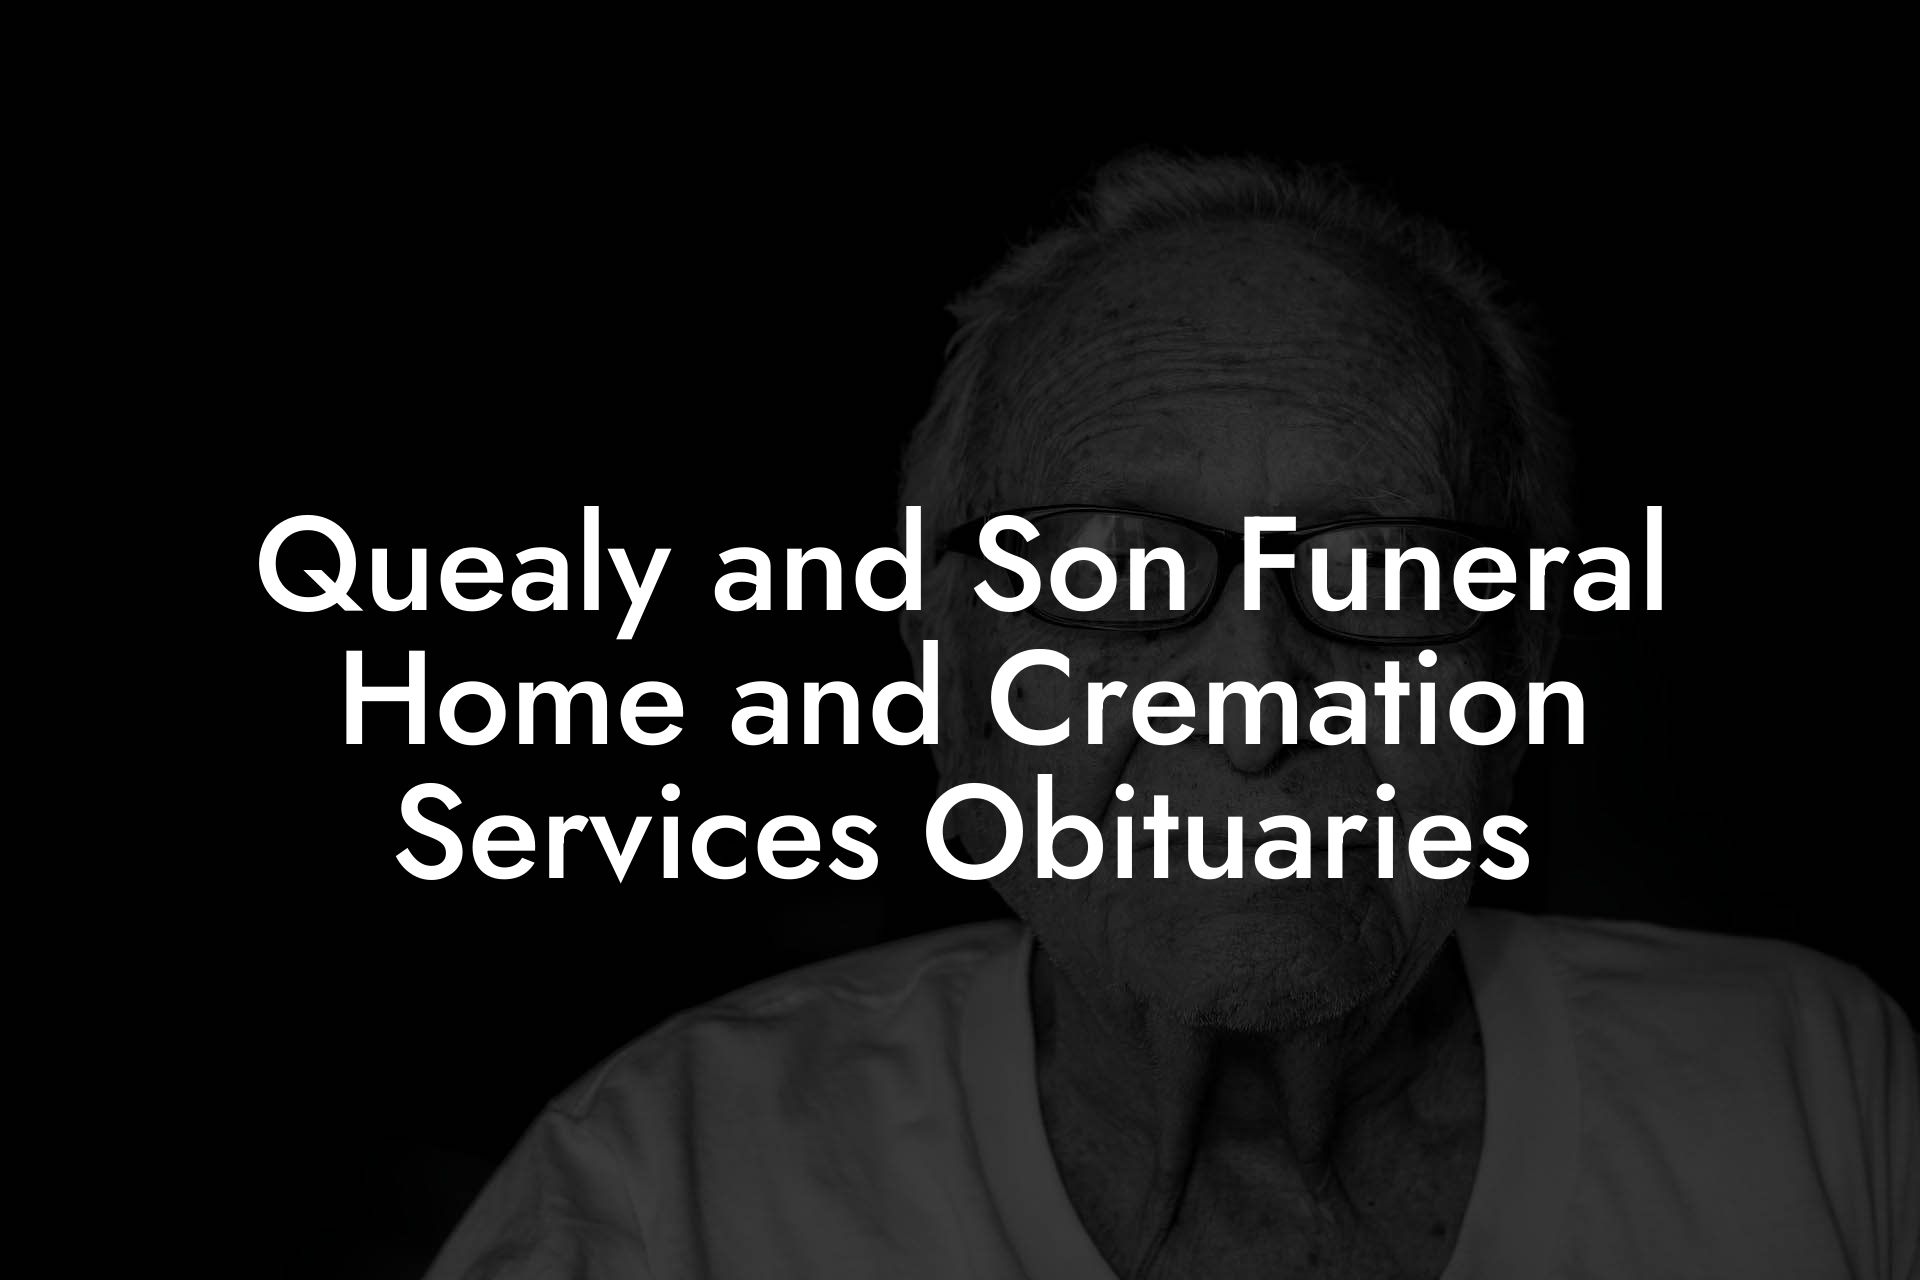 Quealy and Son Funeral Home and Cremation Services Obituaries